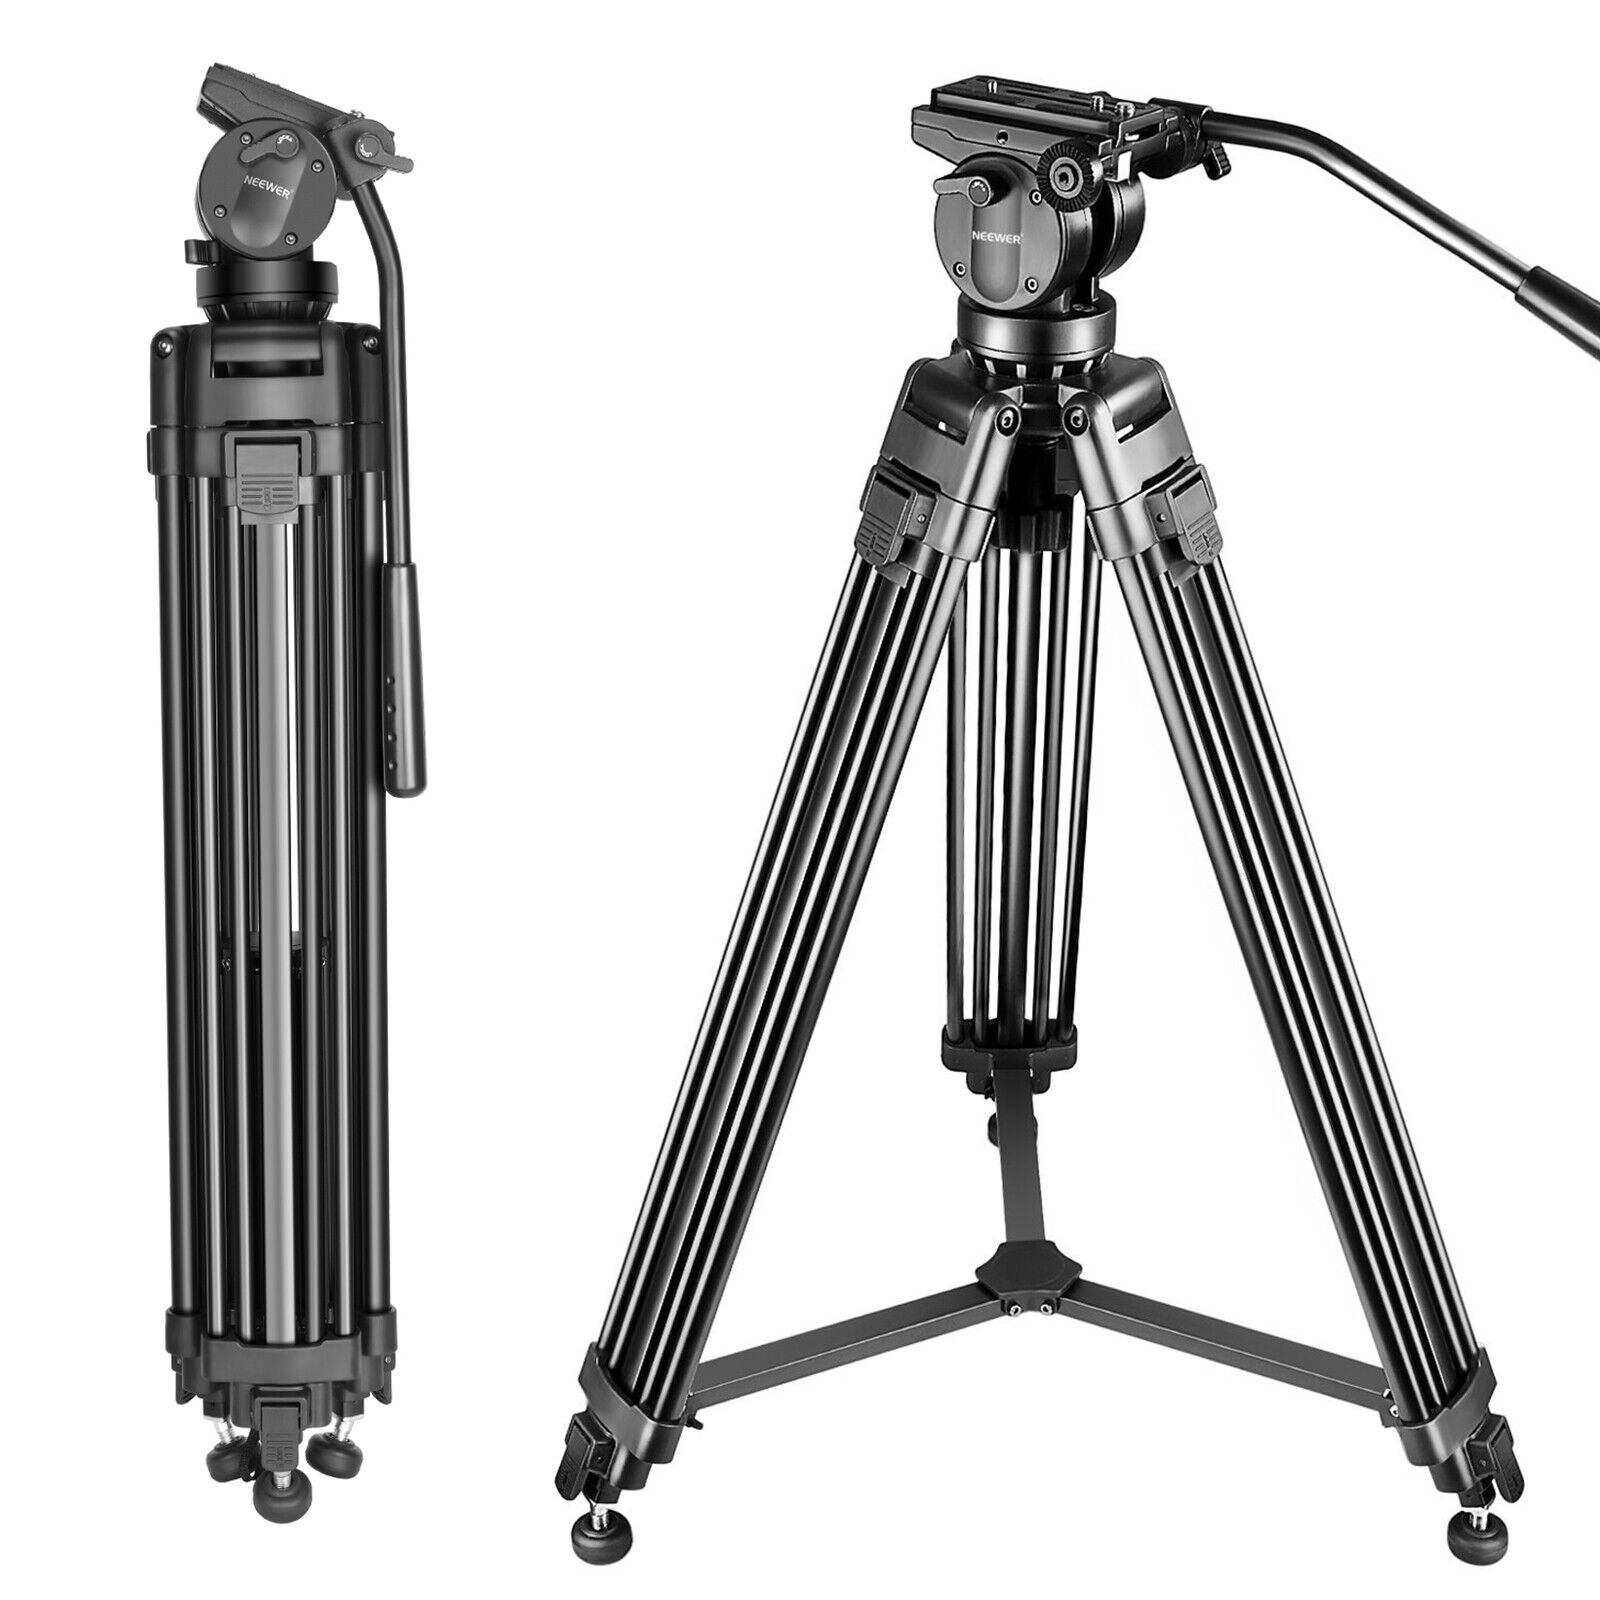 Neewer 155cm Aluminum Tripod with 360 Degree Pan Head for Video Camcorder